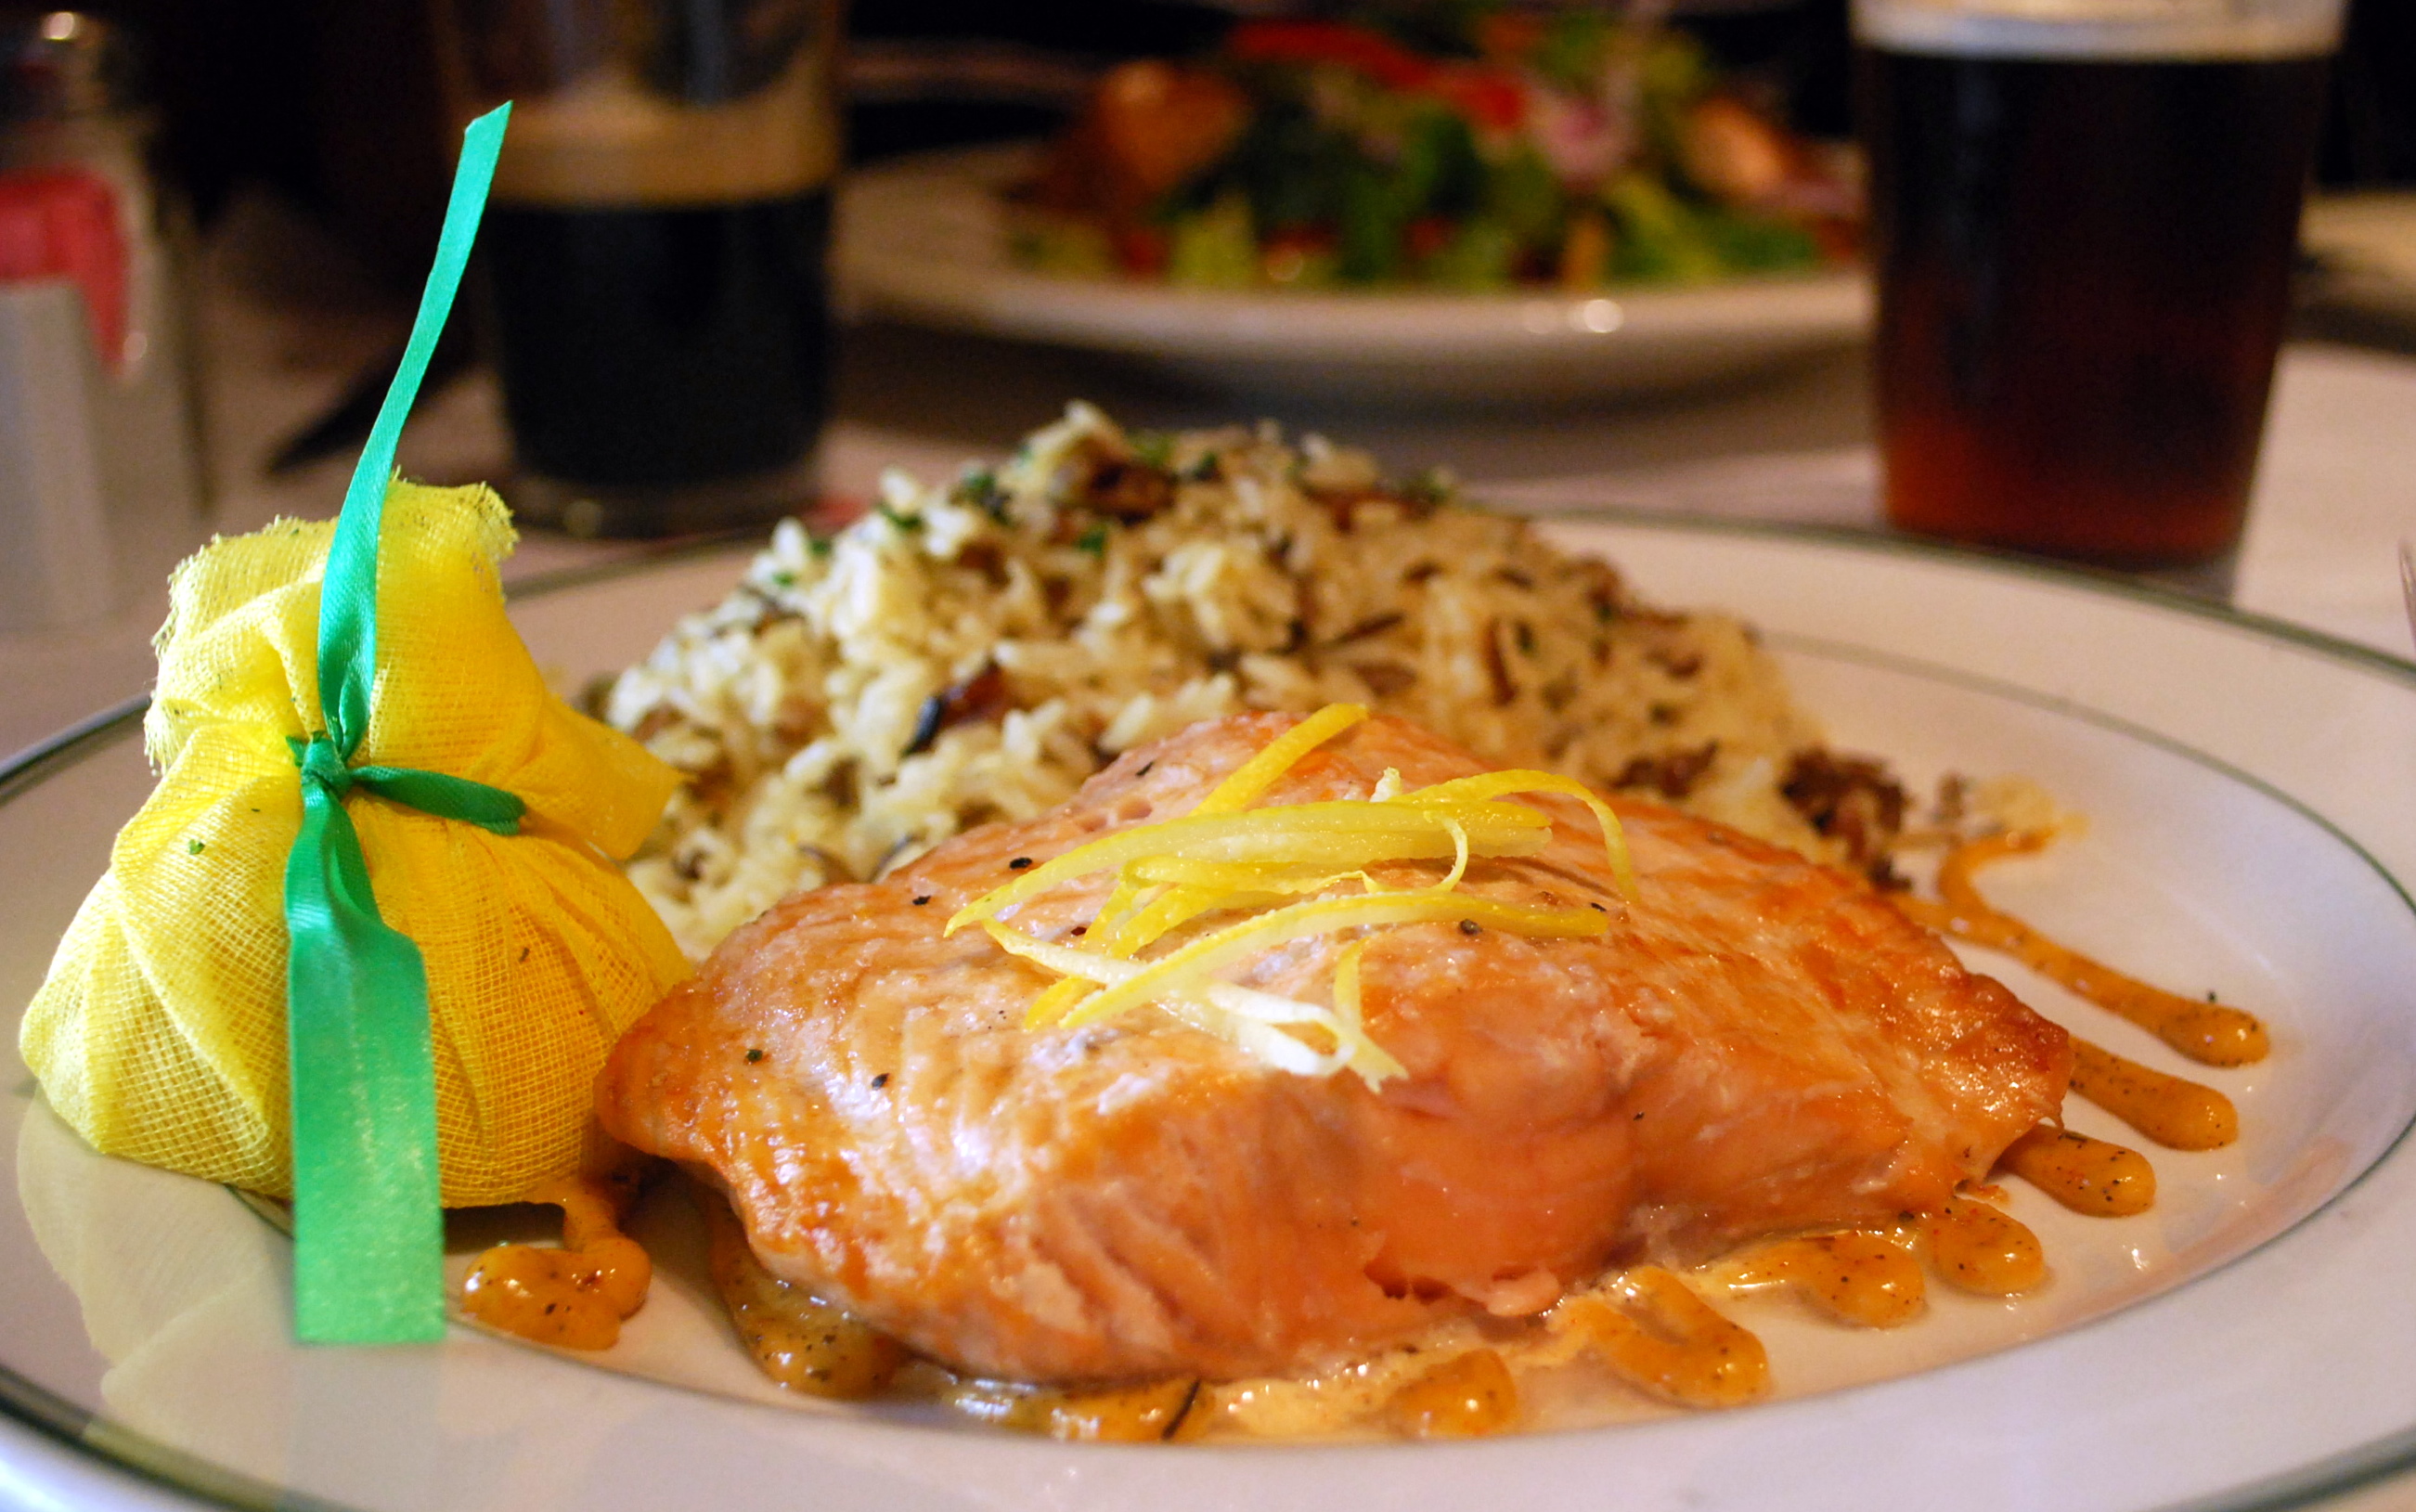 My salmon was oven baked sitting on a hint of lemon cream served with rice pilaf